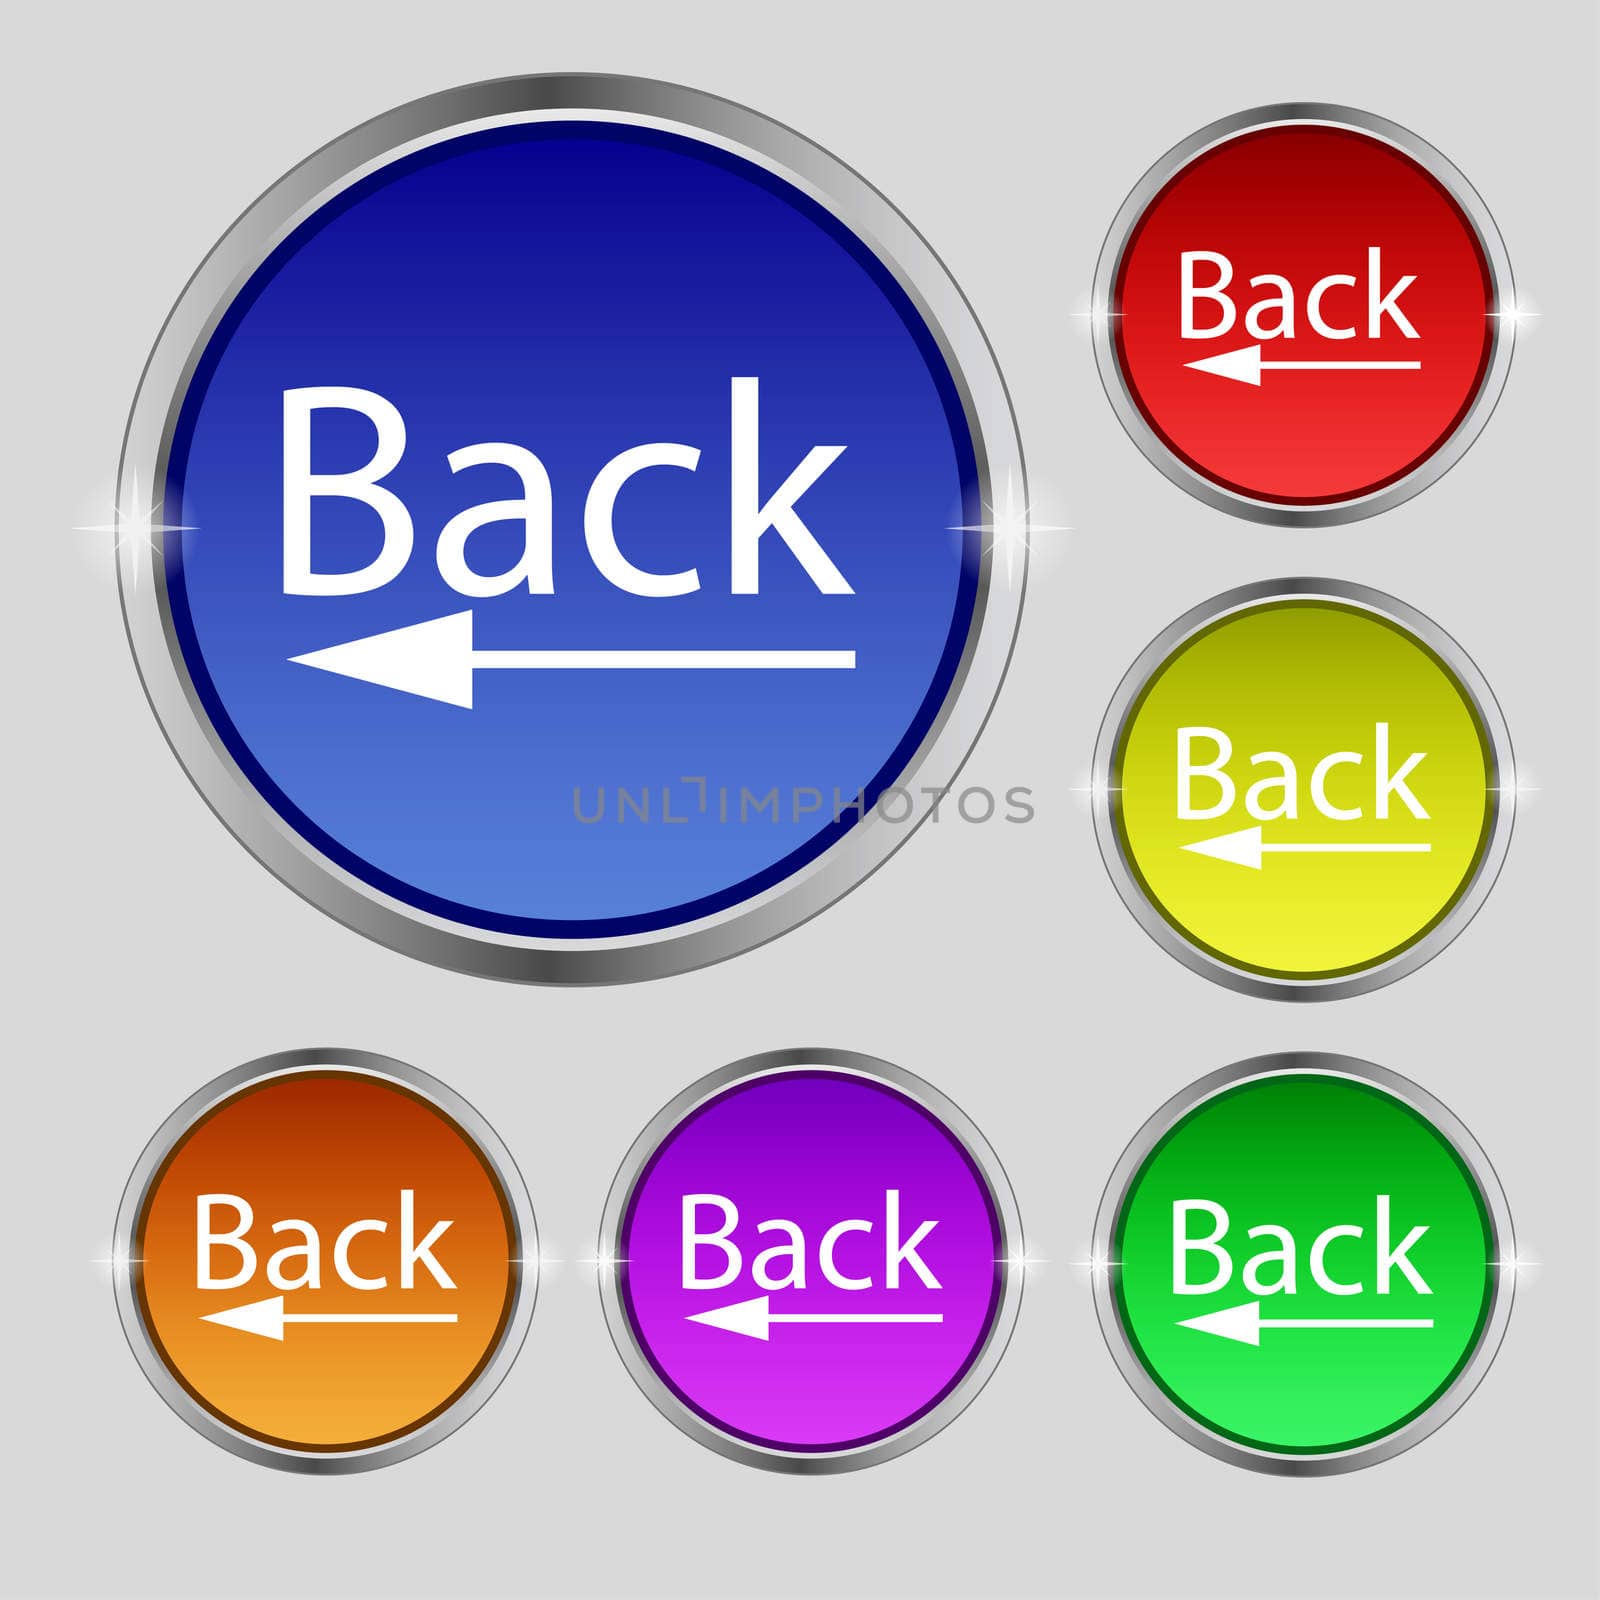 Arrow sign icon. Back button. Navigation symbol. Set of colored buttons illustration